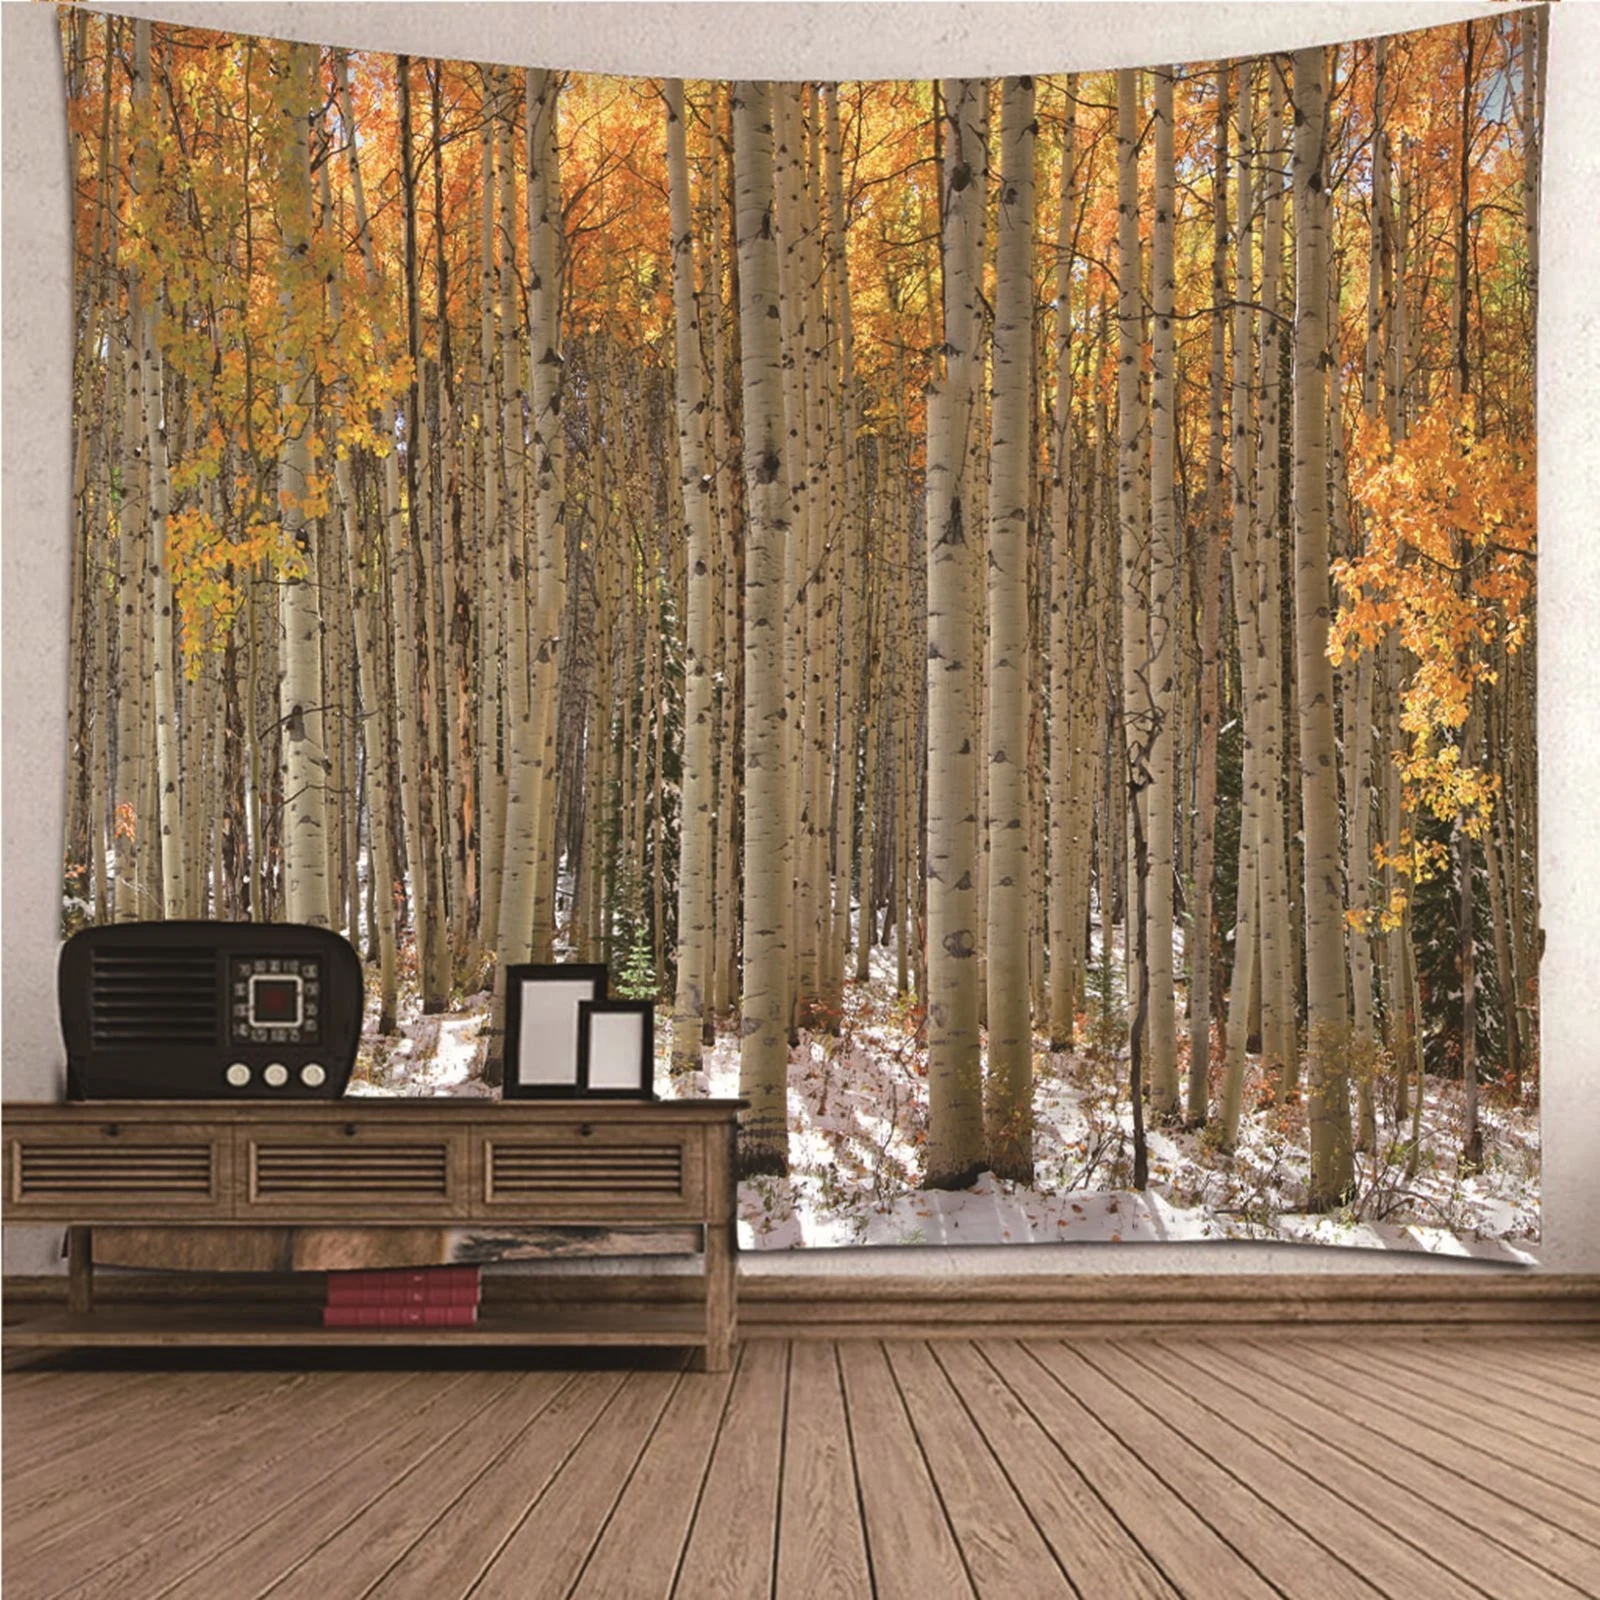 

Tapestry For Men Tasperty Trippy Wall Hanging Nature tree forest landscape Autumn & Birch Forest Wall Hanging Art Decor